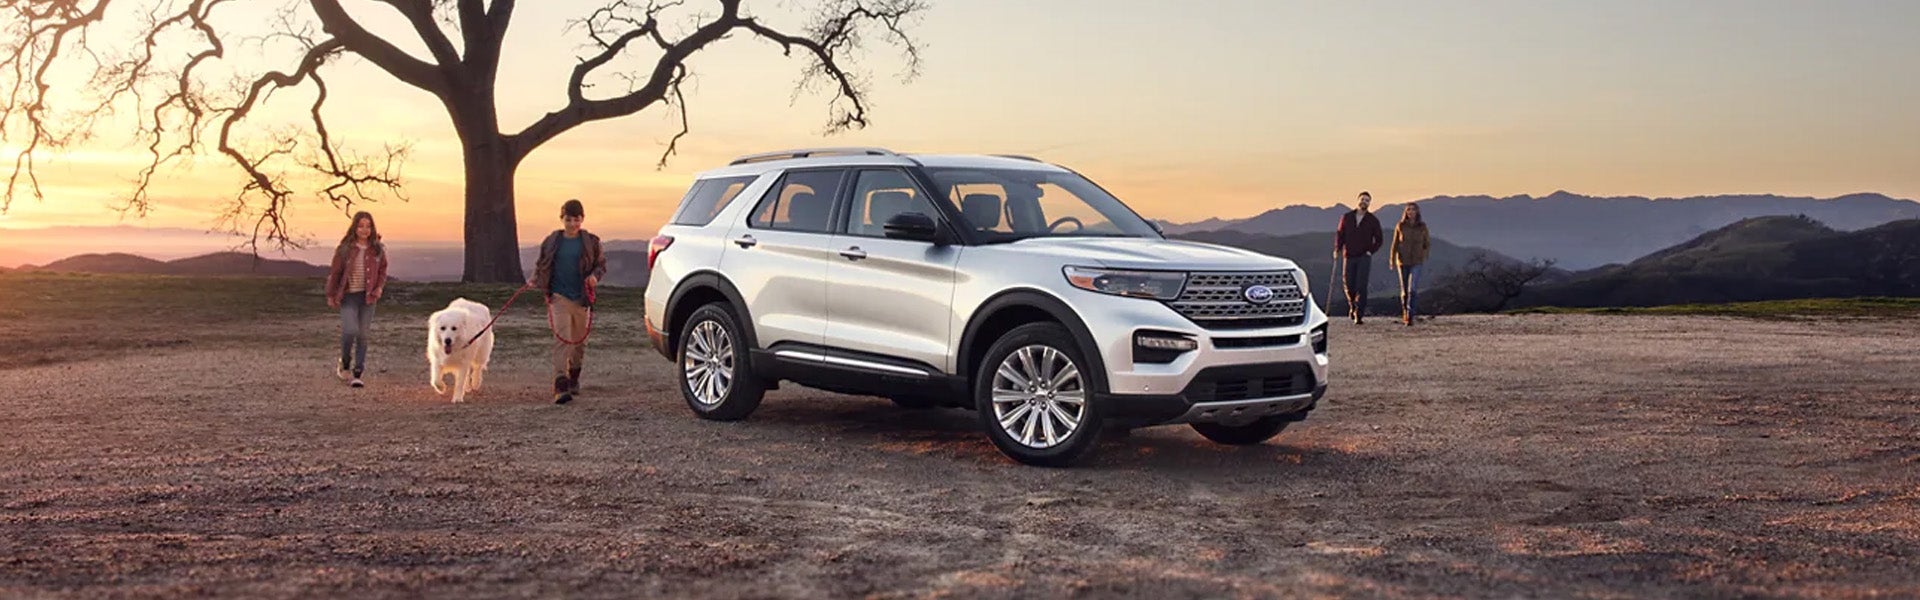 Announcing The All-Powerful Ford Explorer